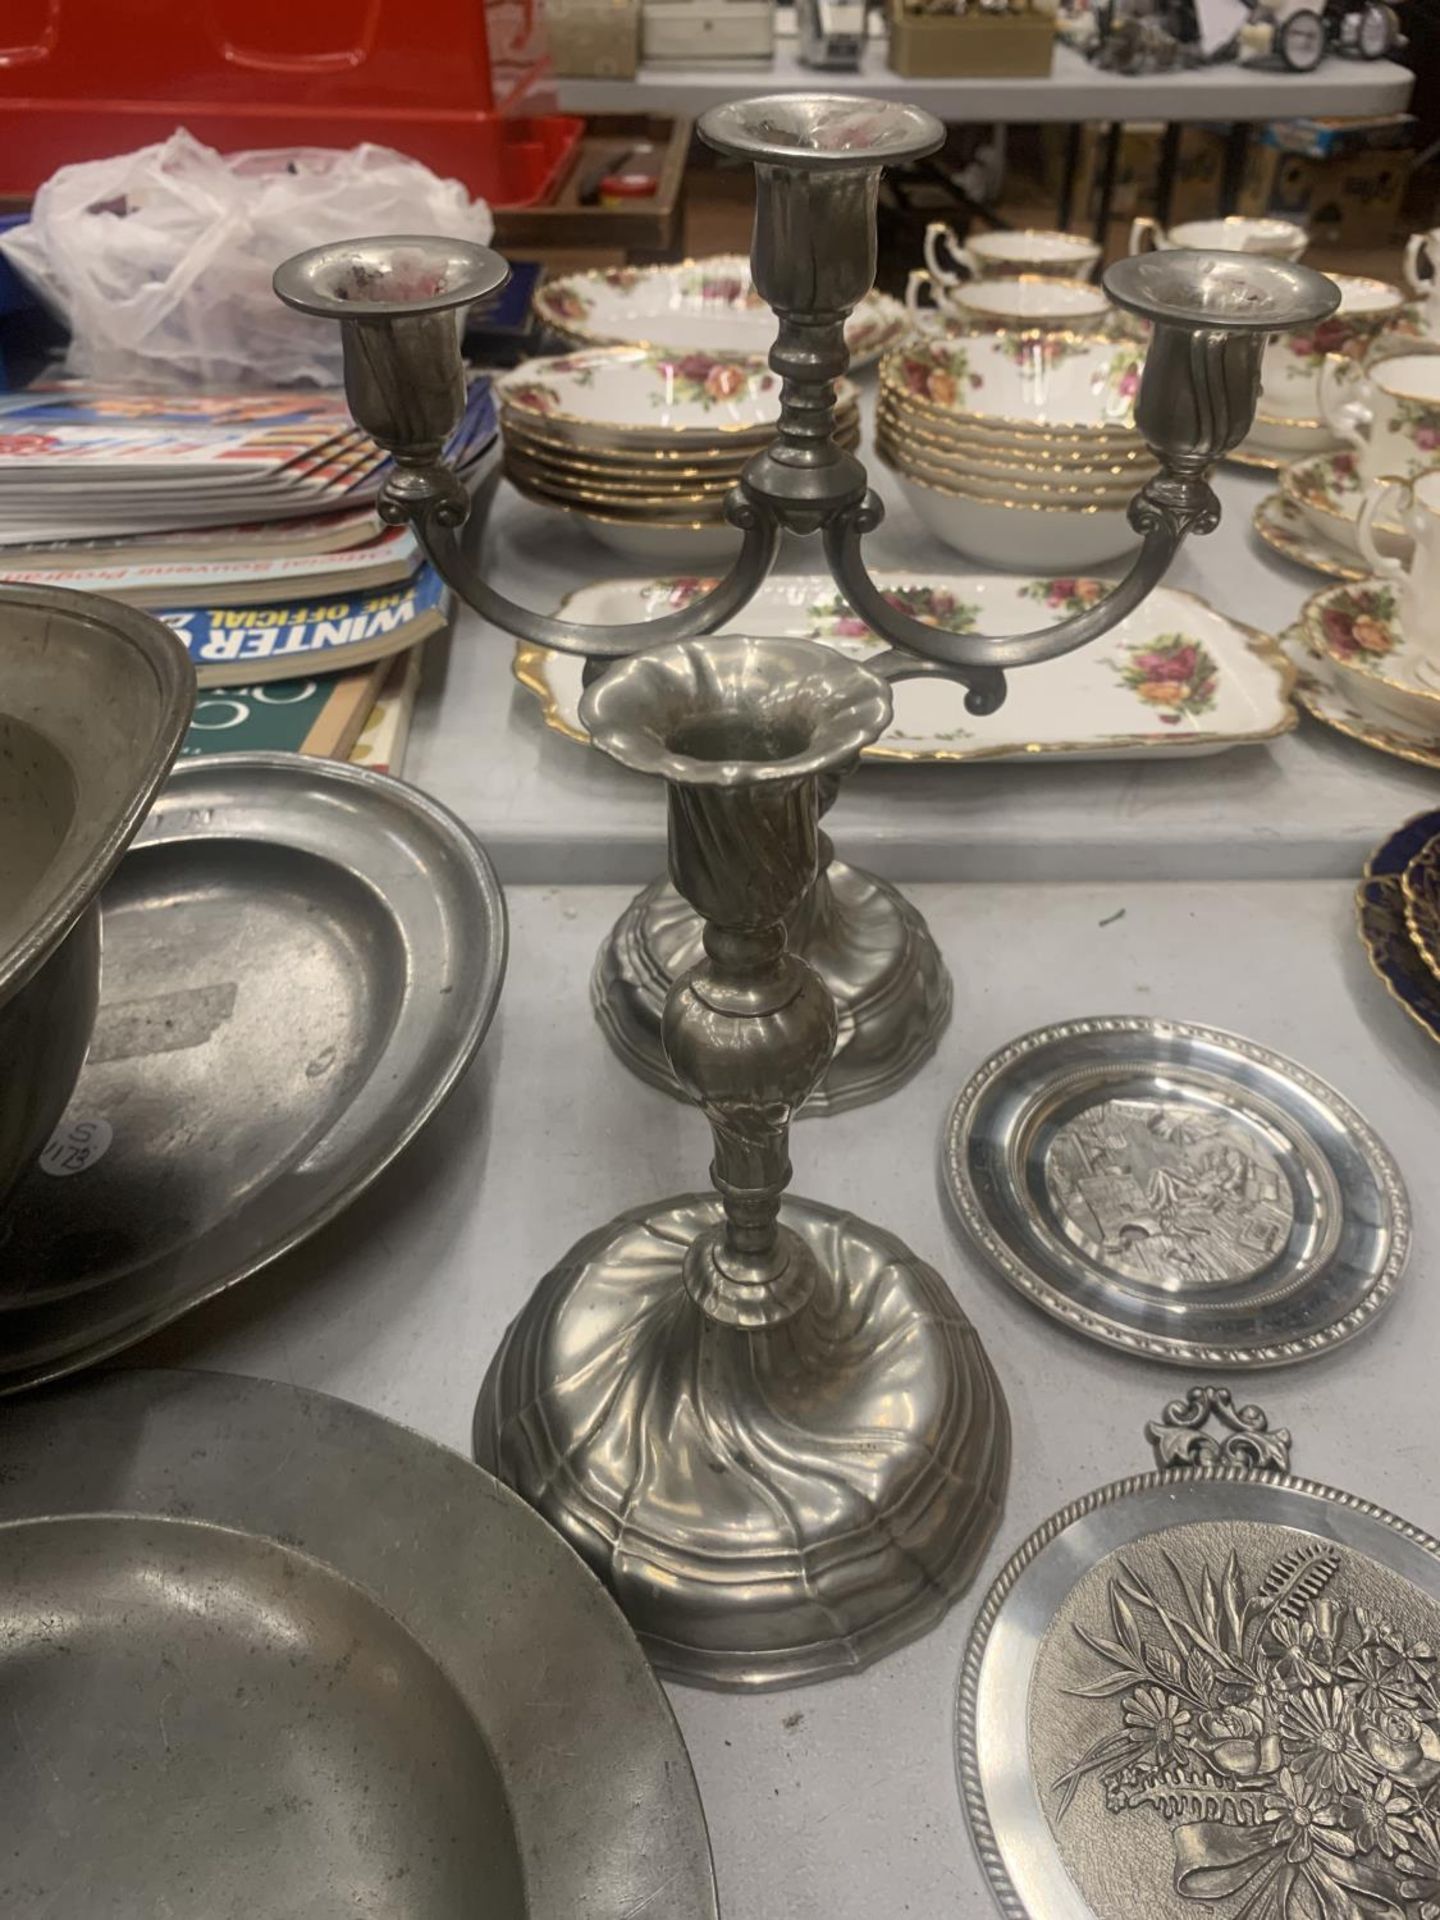 A LARGE QUANTITY OF ANTIQUE AND LATER PEWTER TO INCLUDE PLATES, BOWLS, CANDLESTICKS, ETC - Image 5 of 5